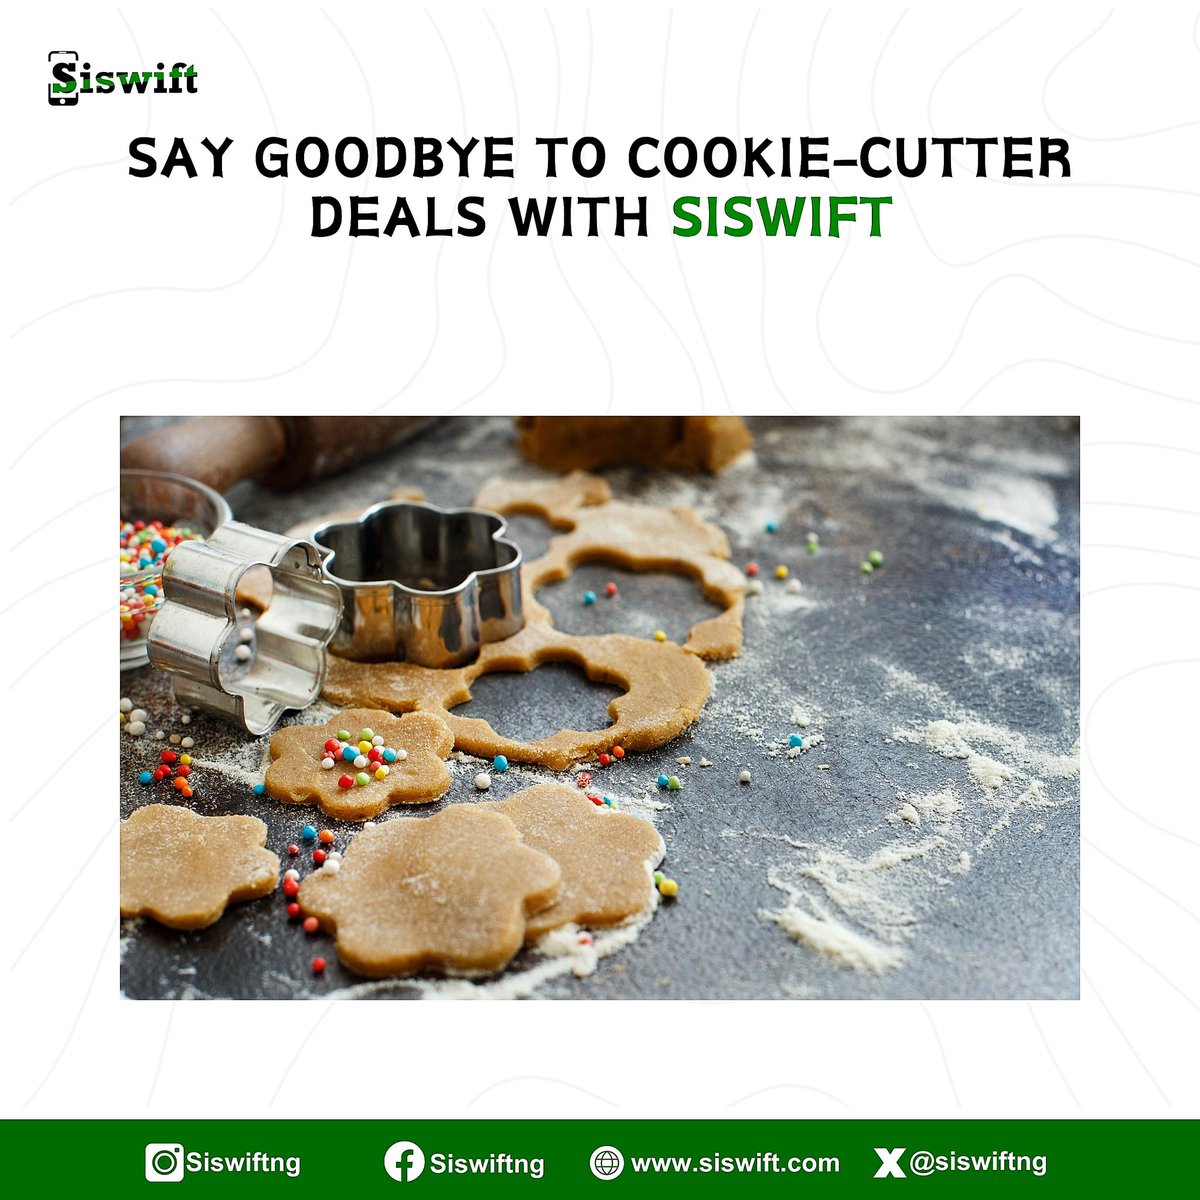 Break free from standard deals with Siswift! 

Negotiate unique offers that match your preferences.
.
.
.
#UniqueDeals #transparenttransactions #negotiationpower #changingthegame #convenience #convenienceoverfixedprices #digitalmarketing #siswift #iphones #phones